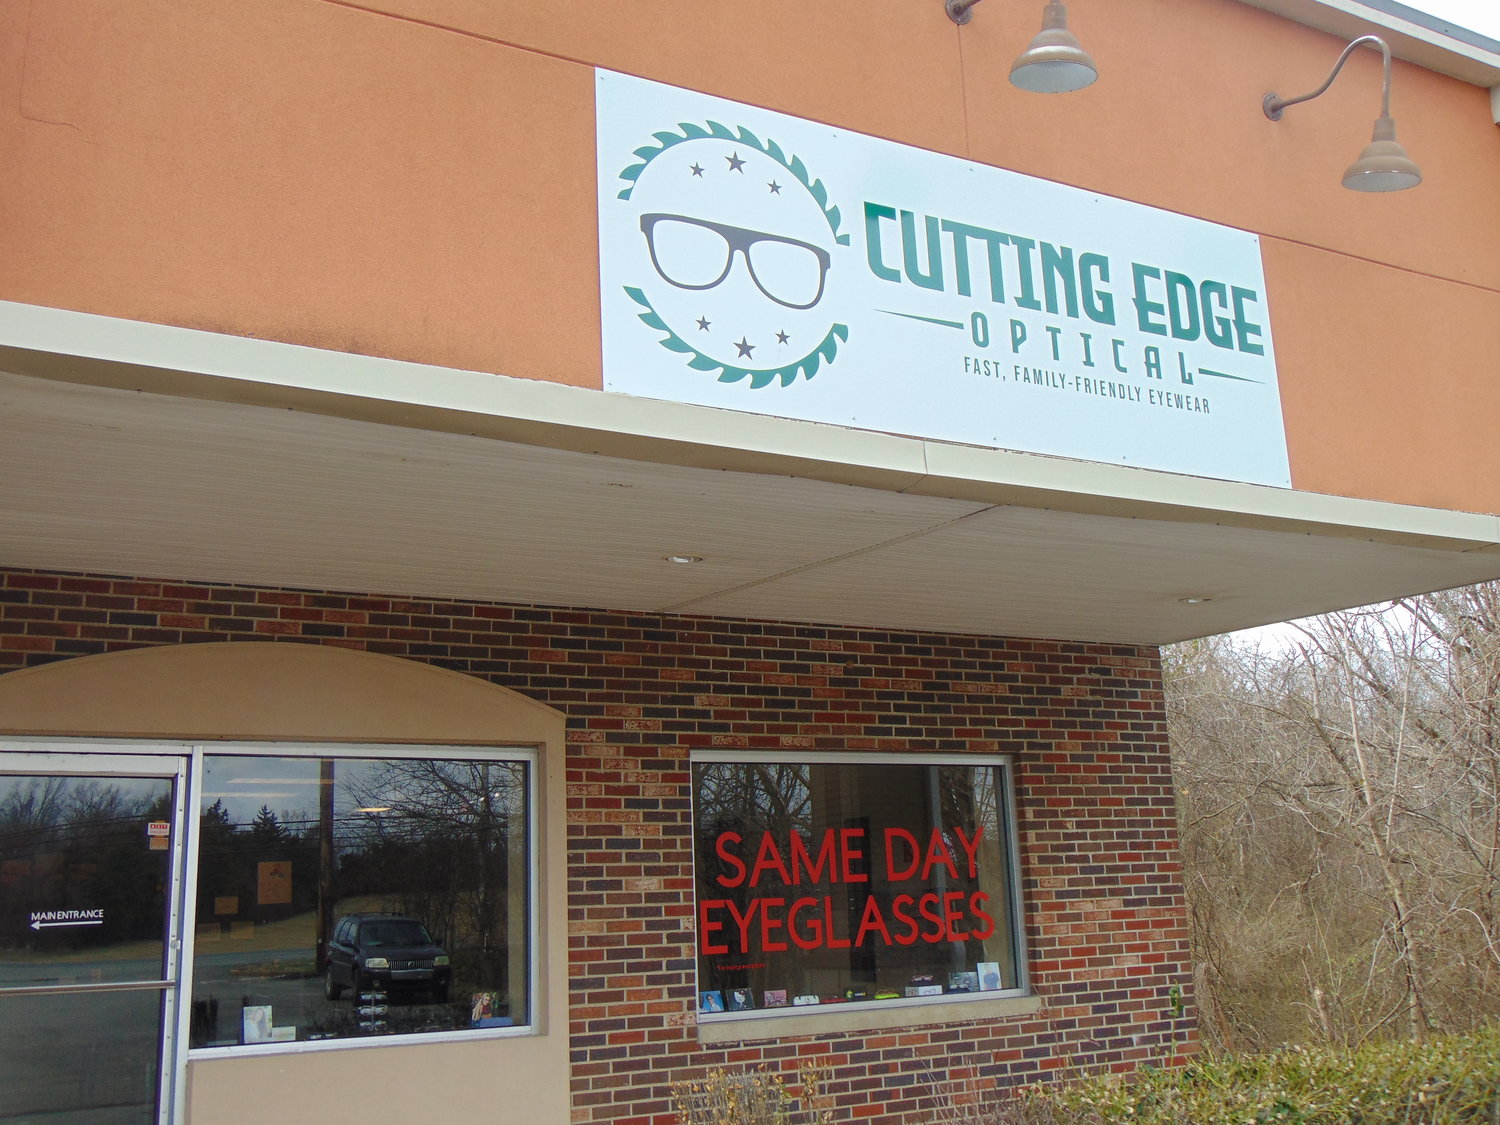 Cutting Edge Optical is located at 875 Union St. in
Shelbyville.